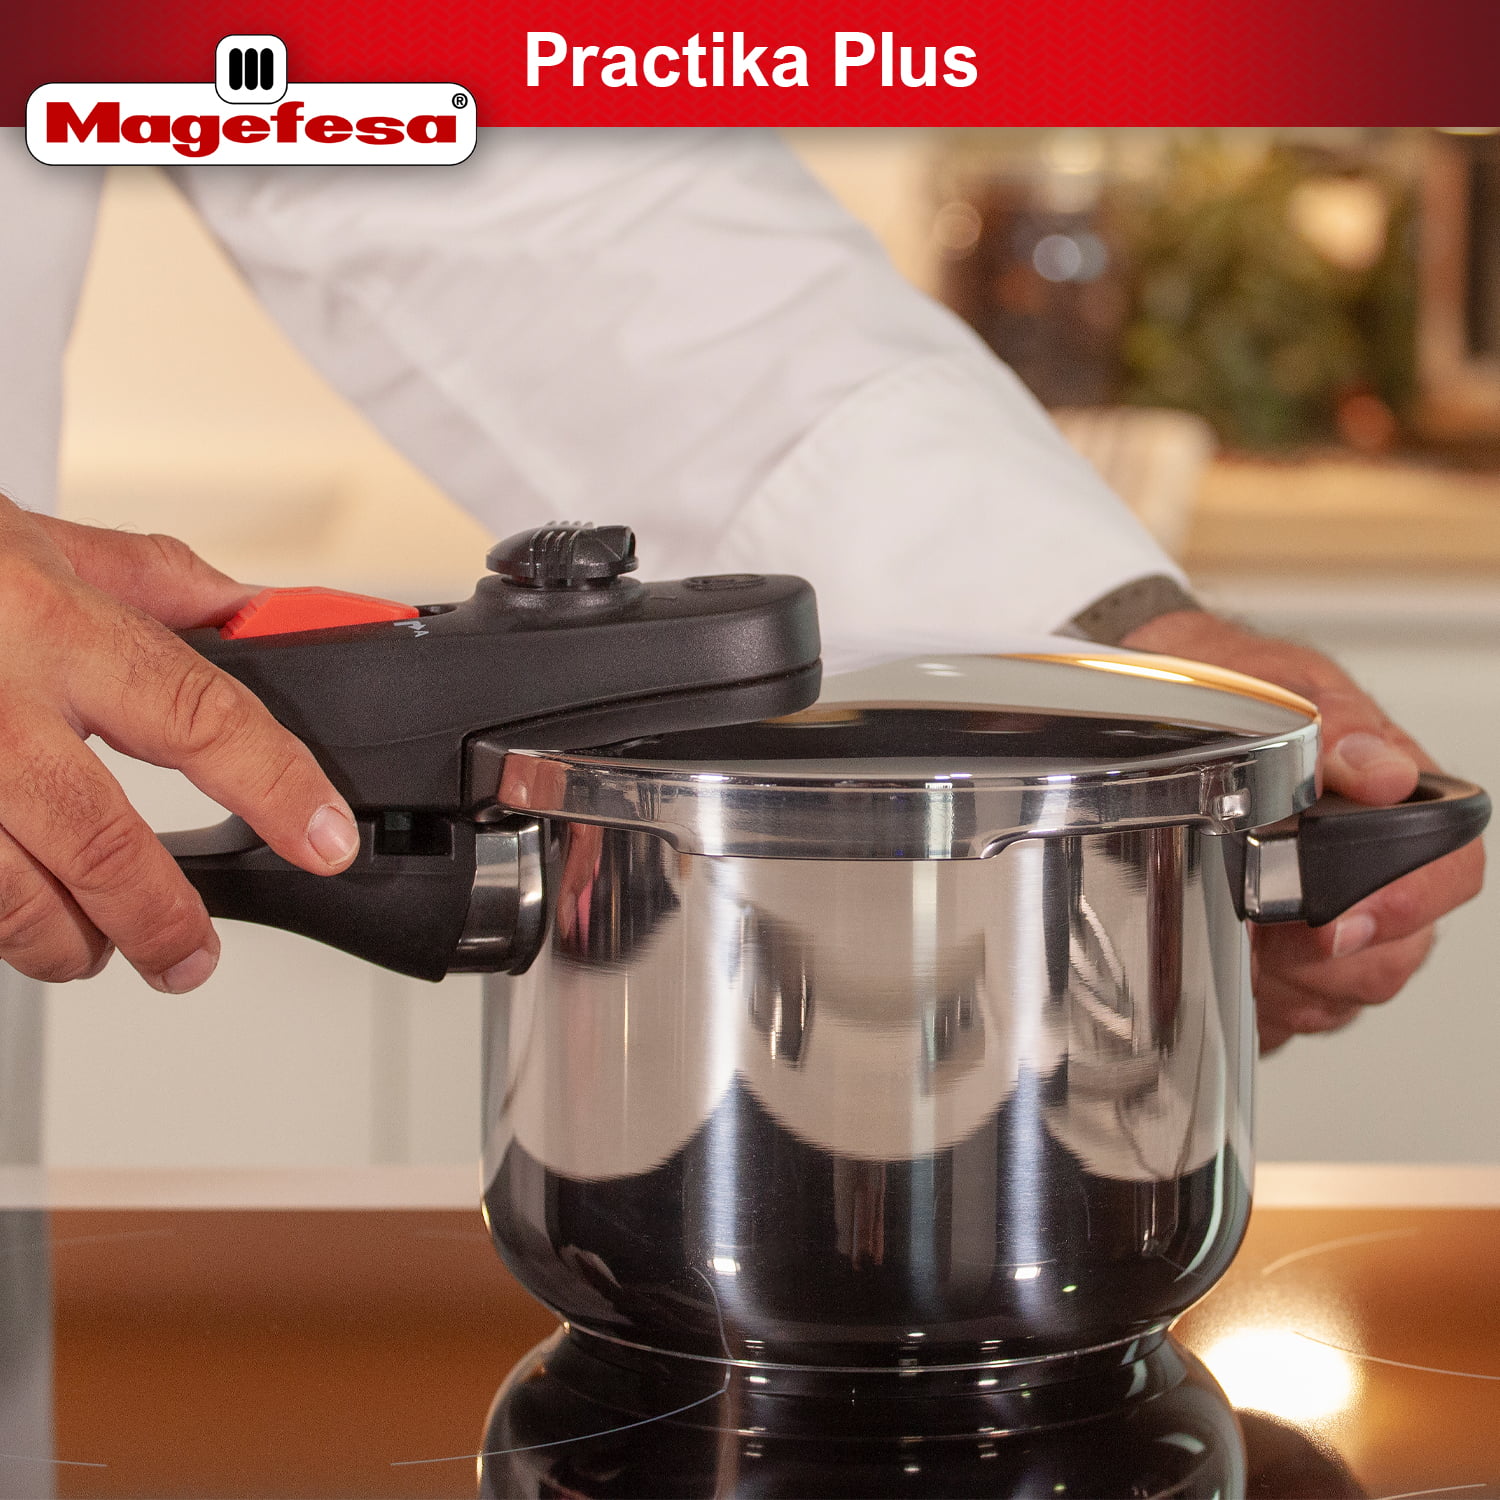 Magefesa Practika Plus 8 Qt. Stainless Steel Stovetop Pressure Cookers  01OPPRAPL75 - The Home Depot